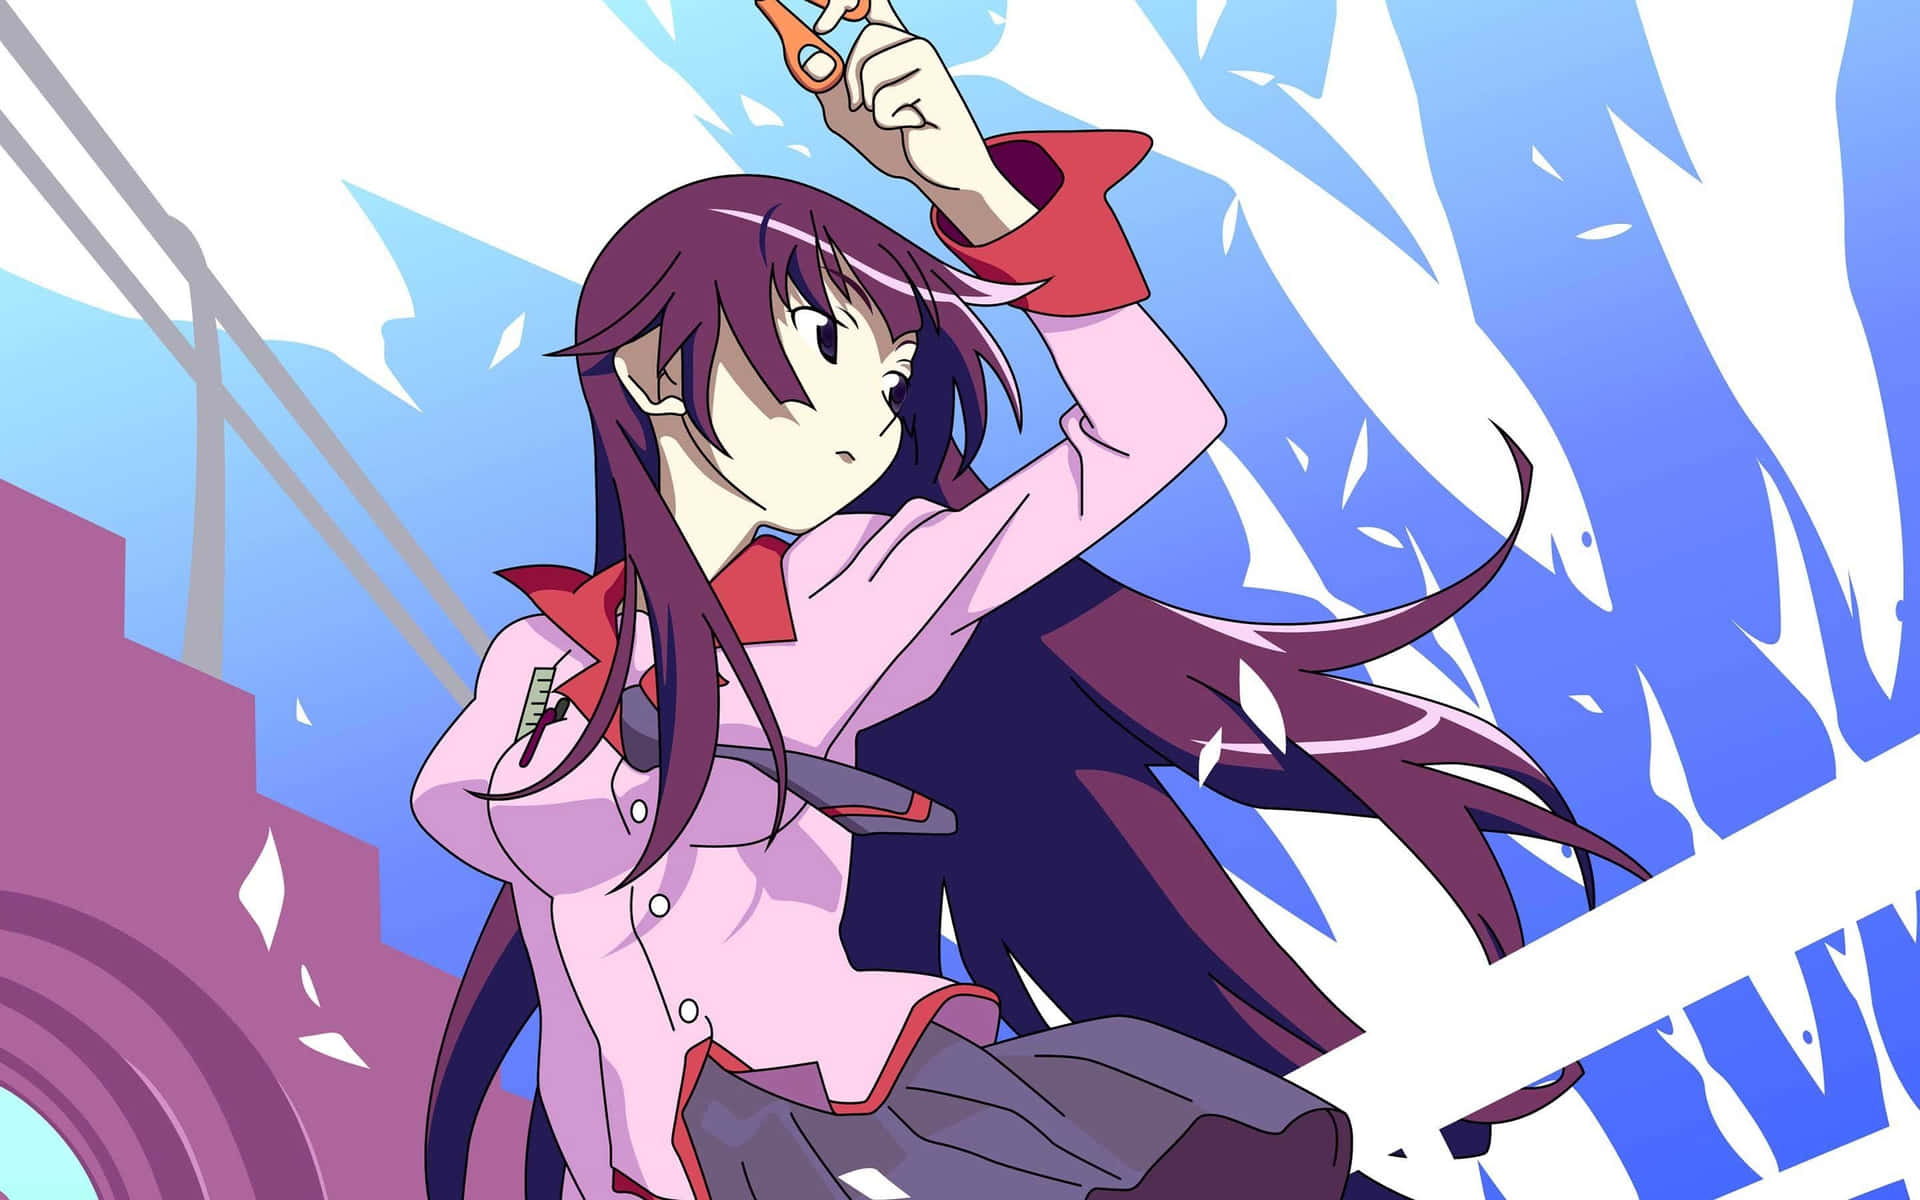 A Girl With Long Hair Is Holding A Sword